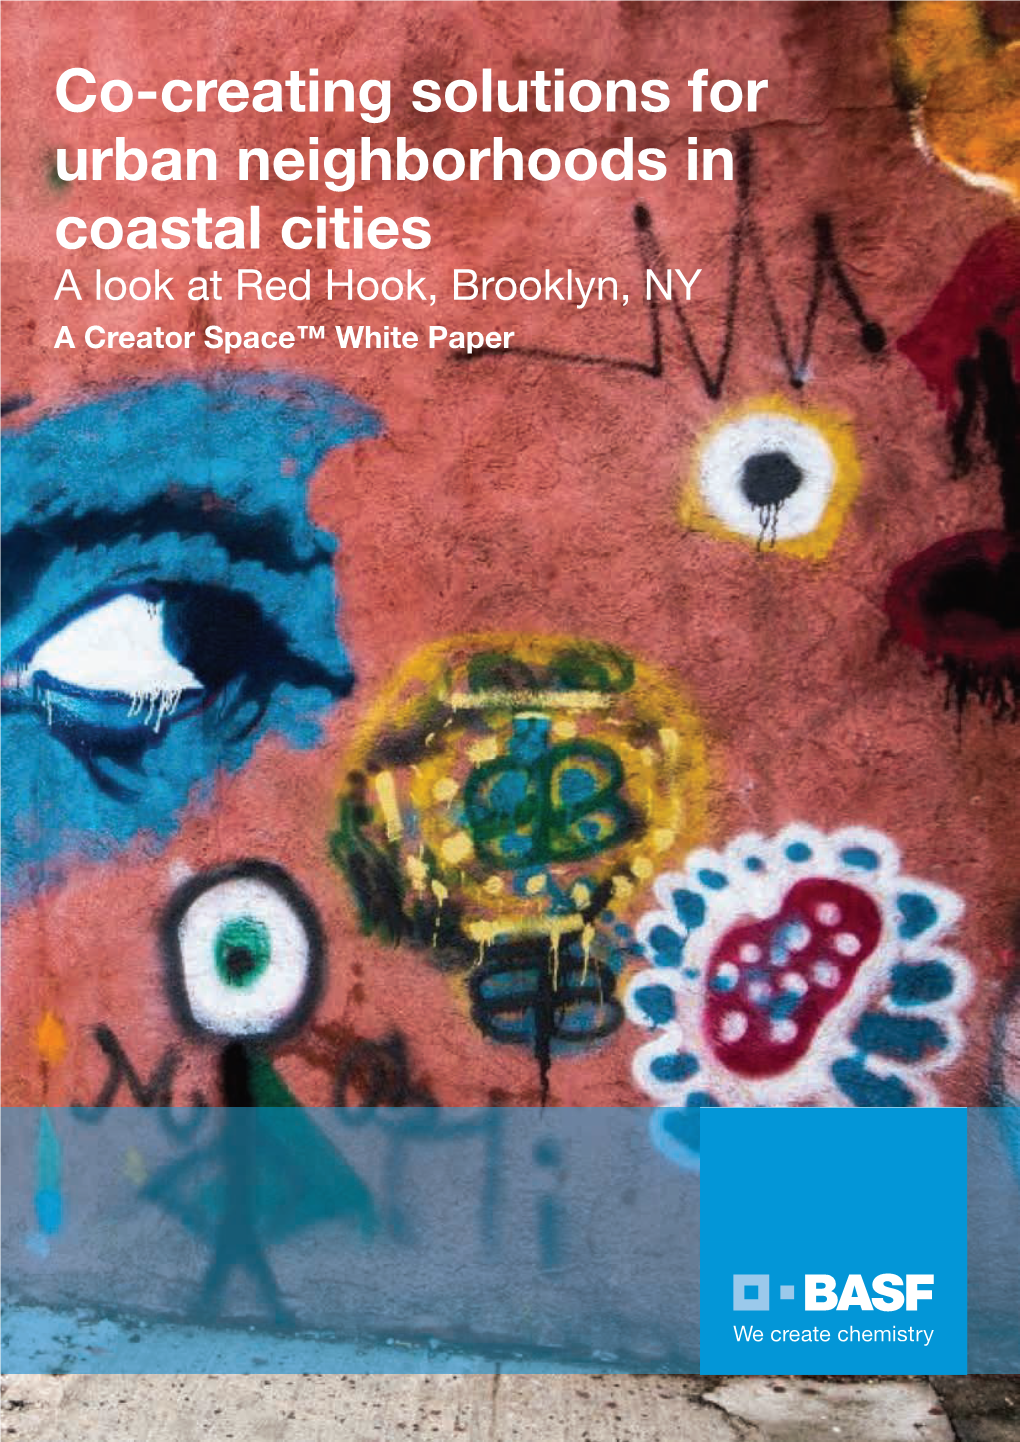 Co-Creating Solutions for Urban Neighborhoods in Coastal Cities a Look at Red Hook, Brooklyn, NY a Creator Space™ White Paper Creator Space™ White Paper